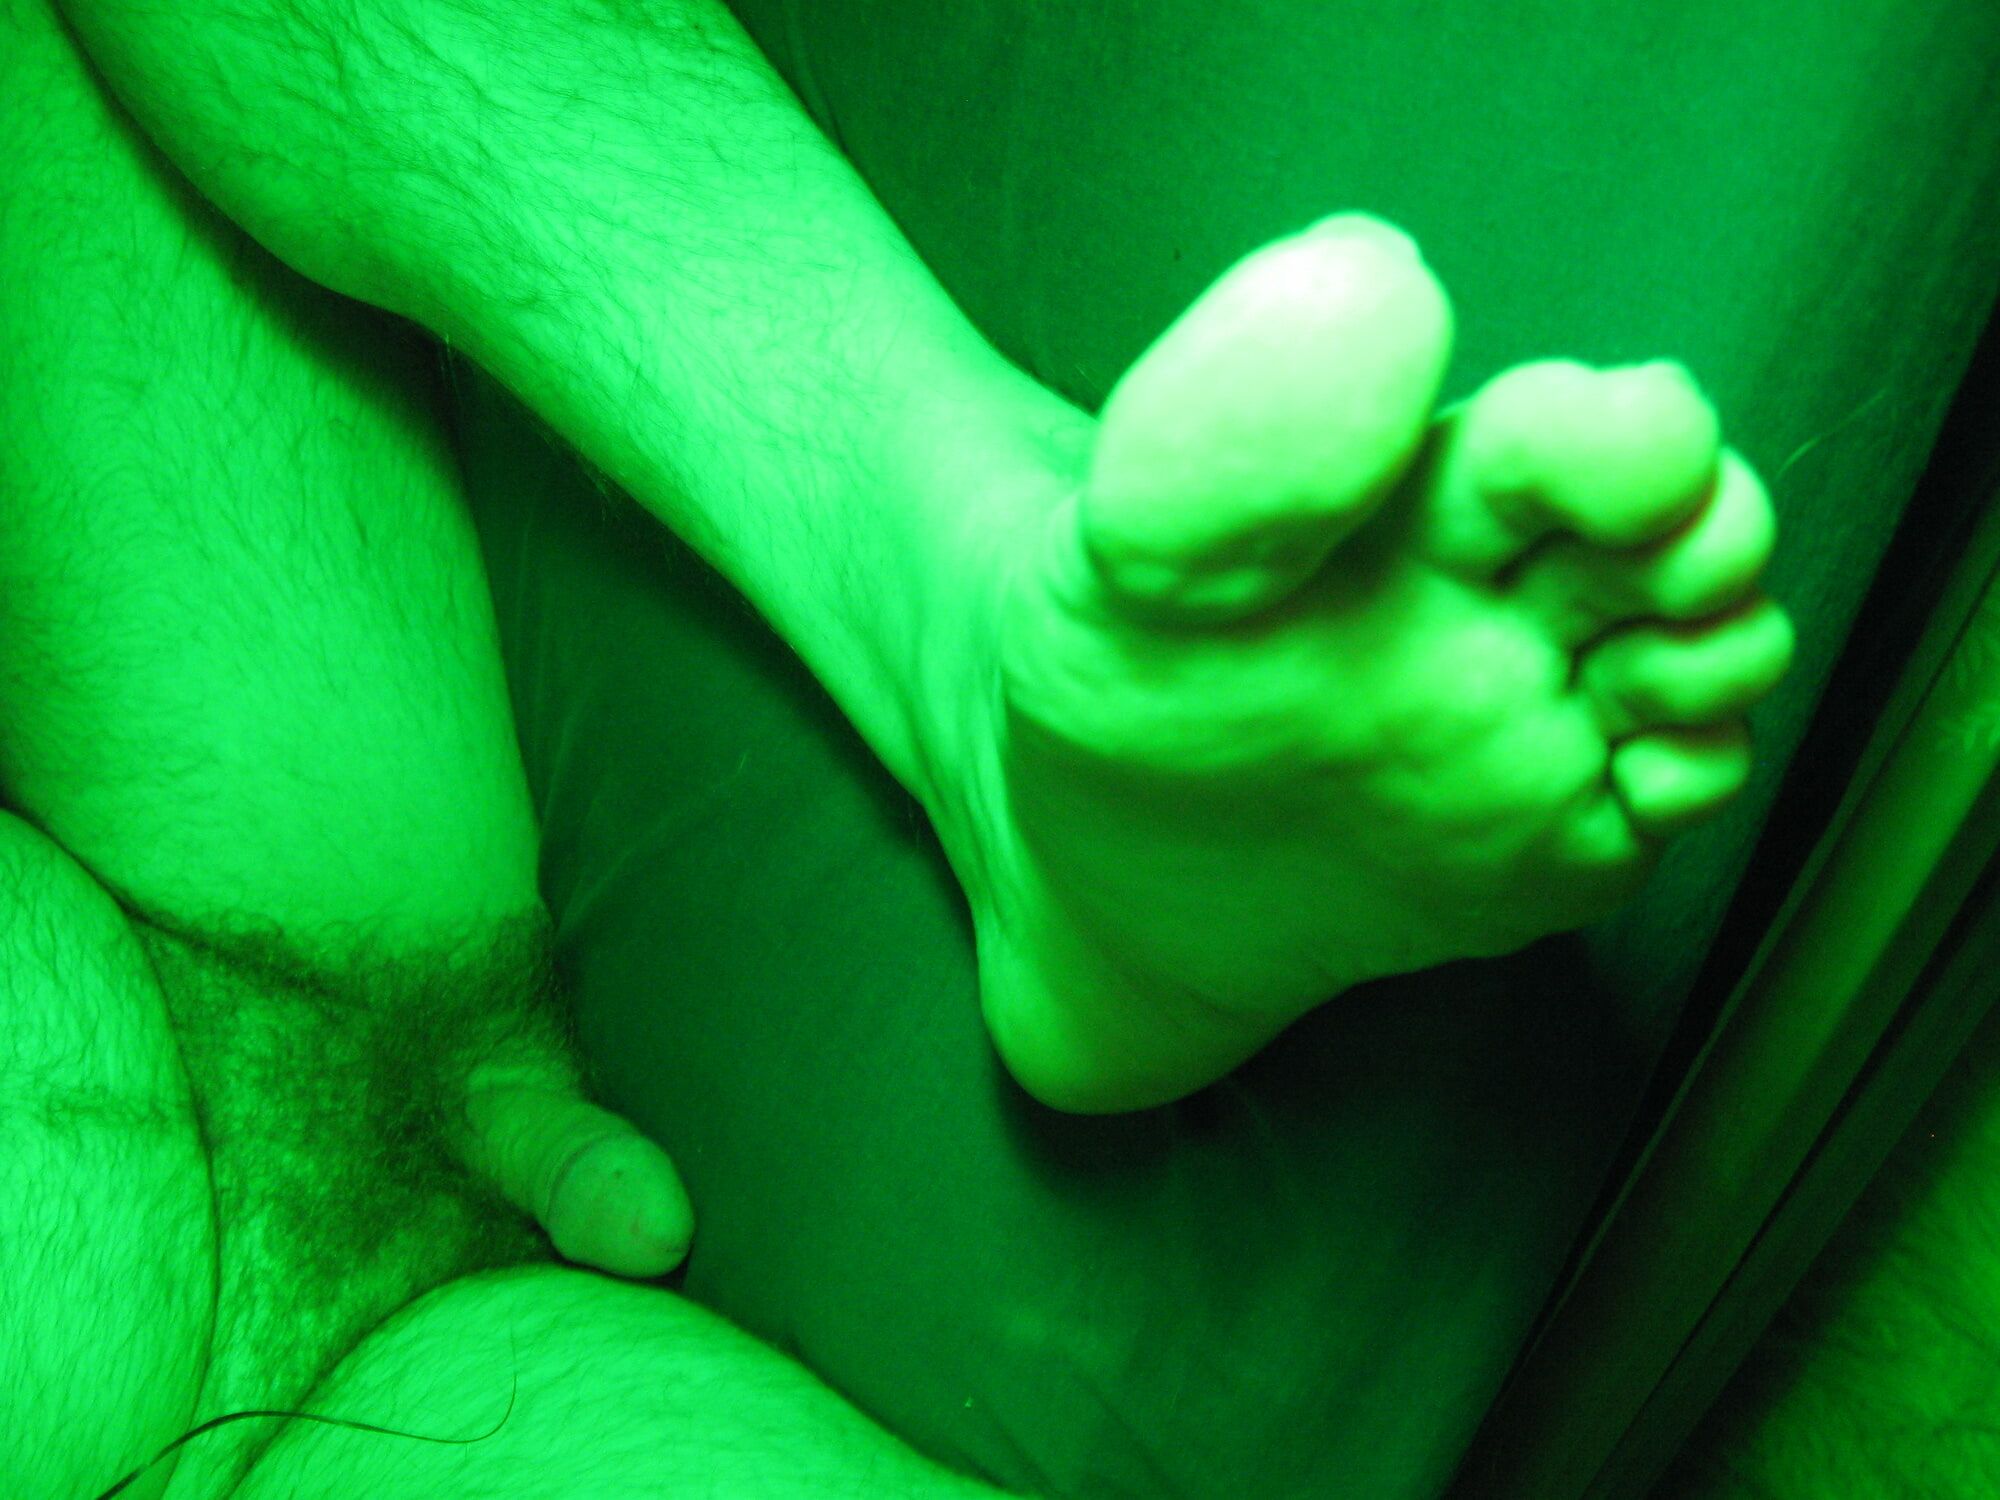 Green Toes #4